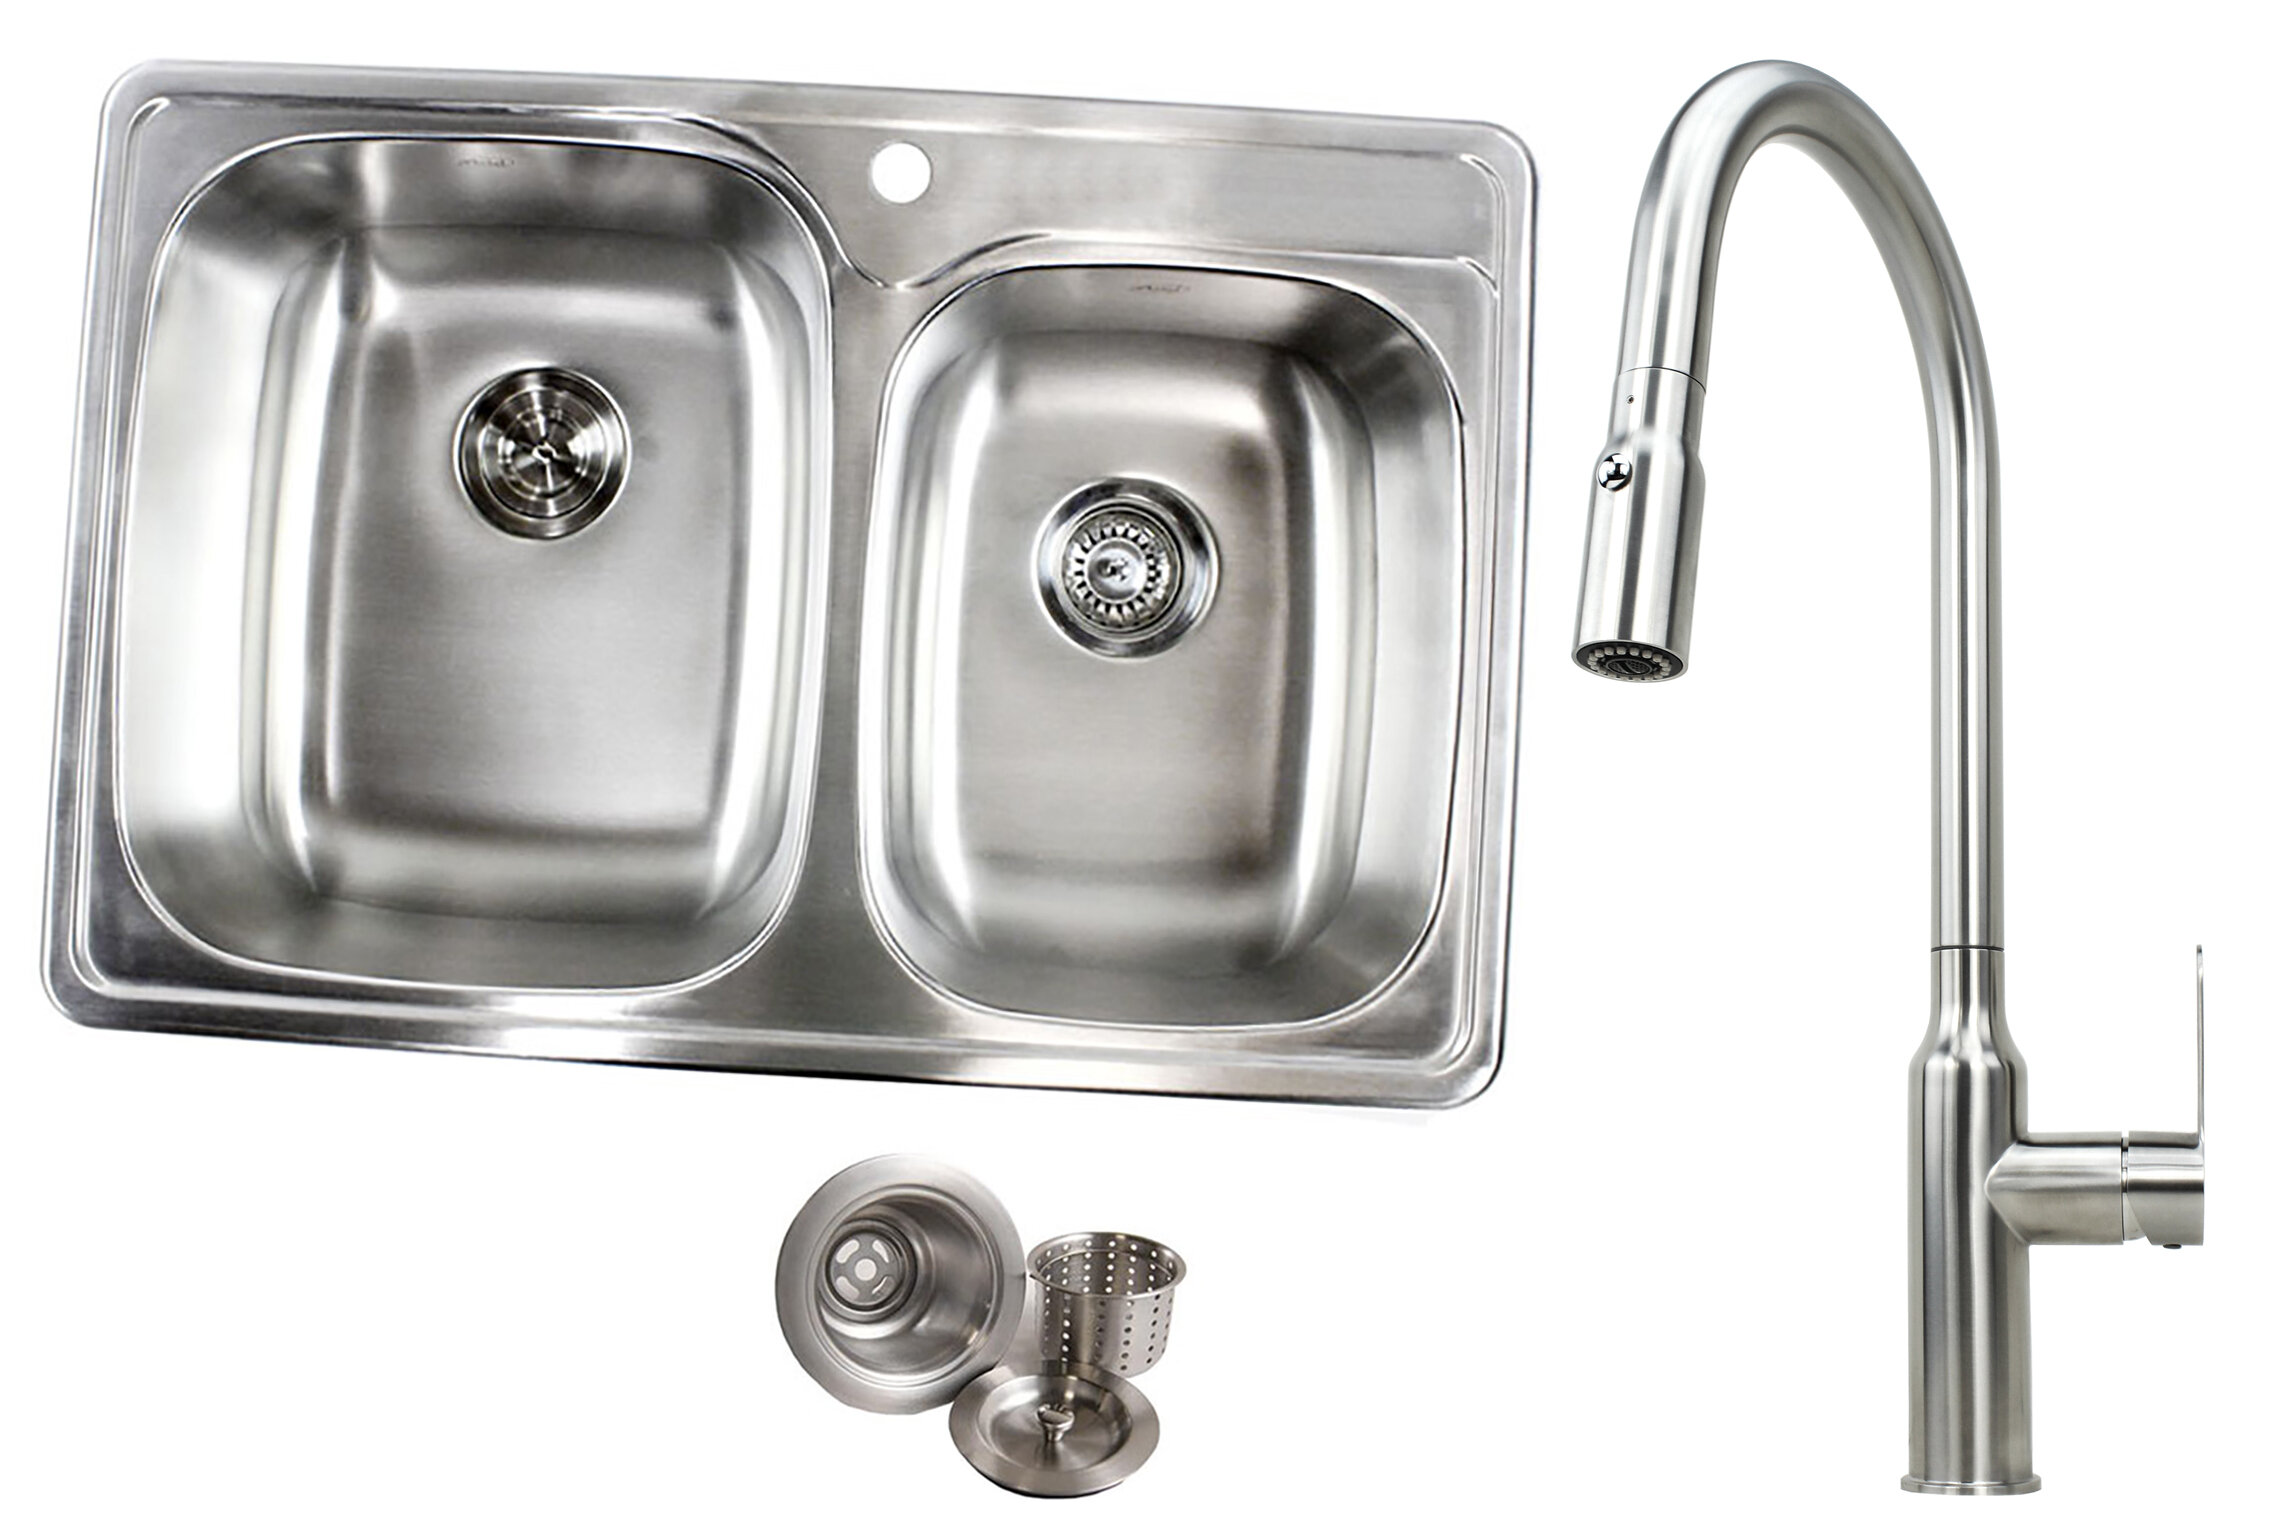 Emodern Decor 33 X 22 Double Basin Drop In Kitchen Sink With